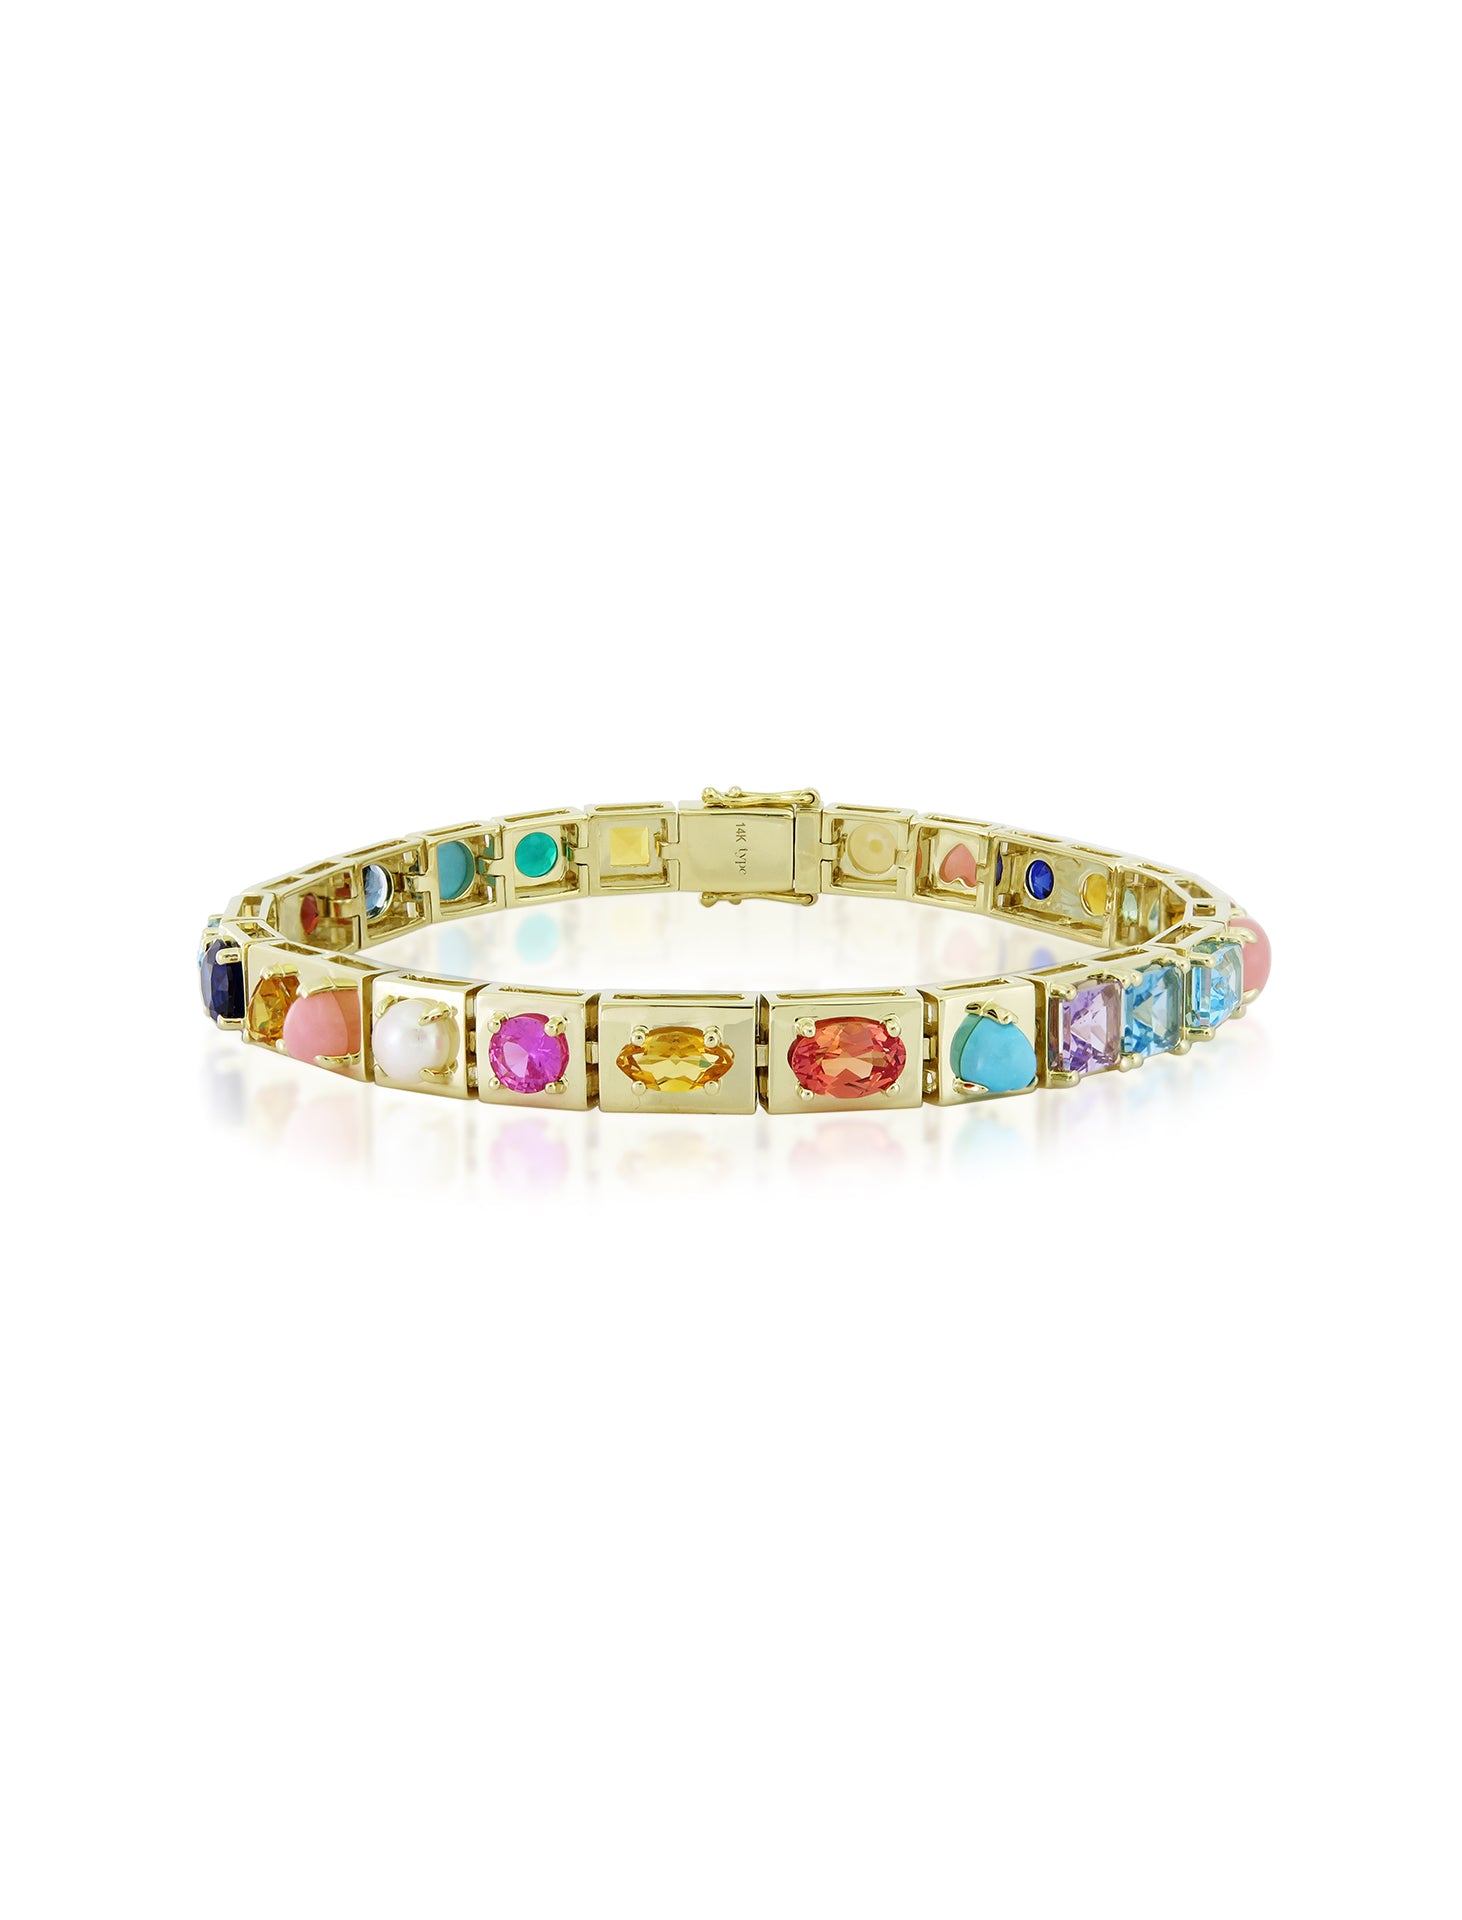 The l'Ego Collection, 14K Yellow Gold + Multi-Gemstone Bracelet